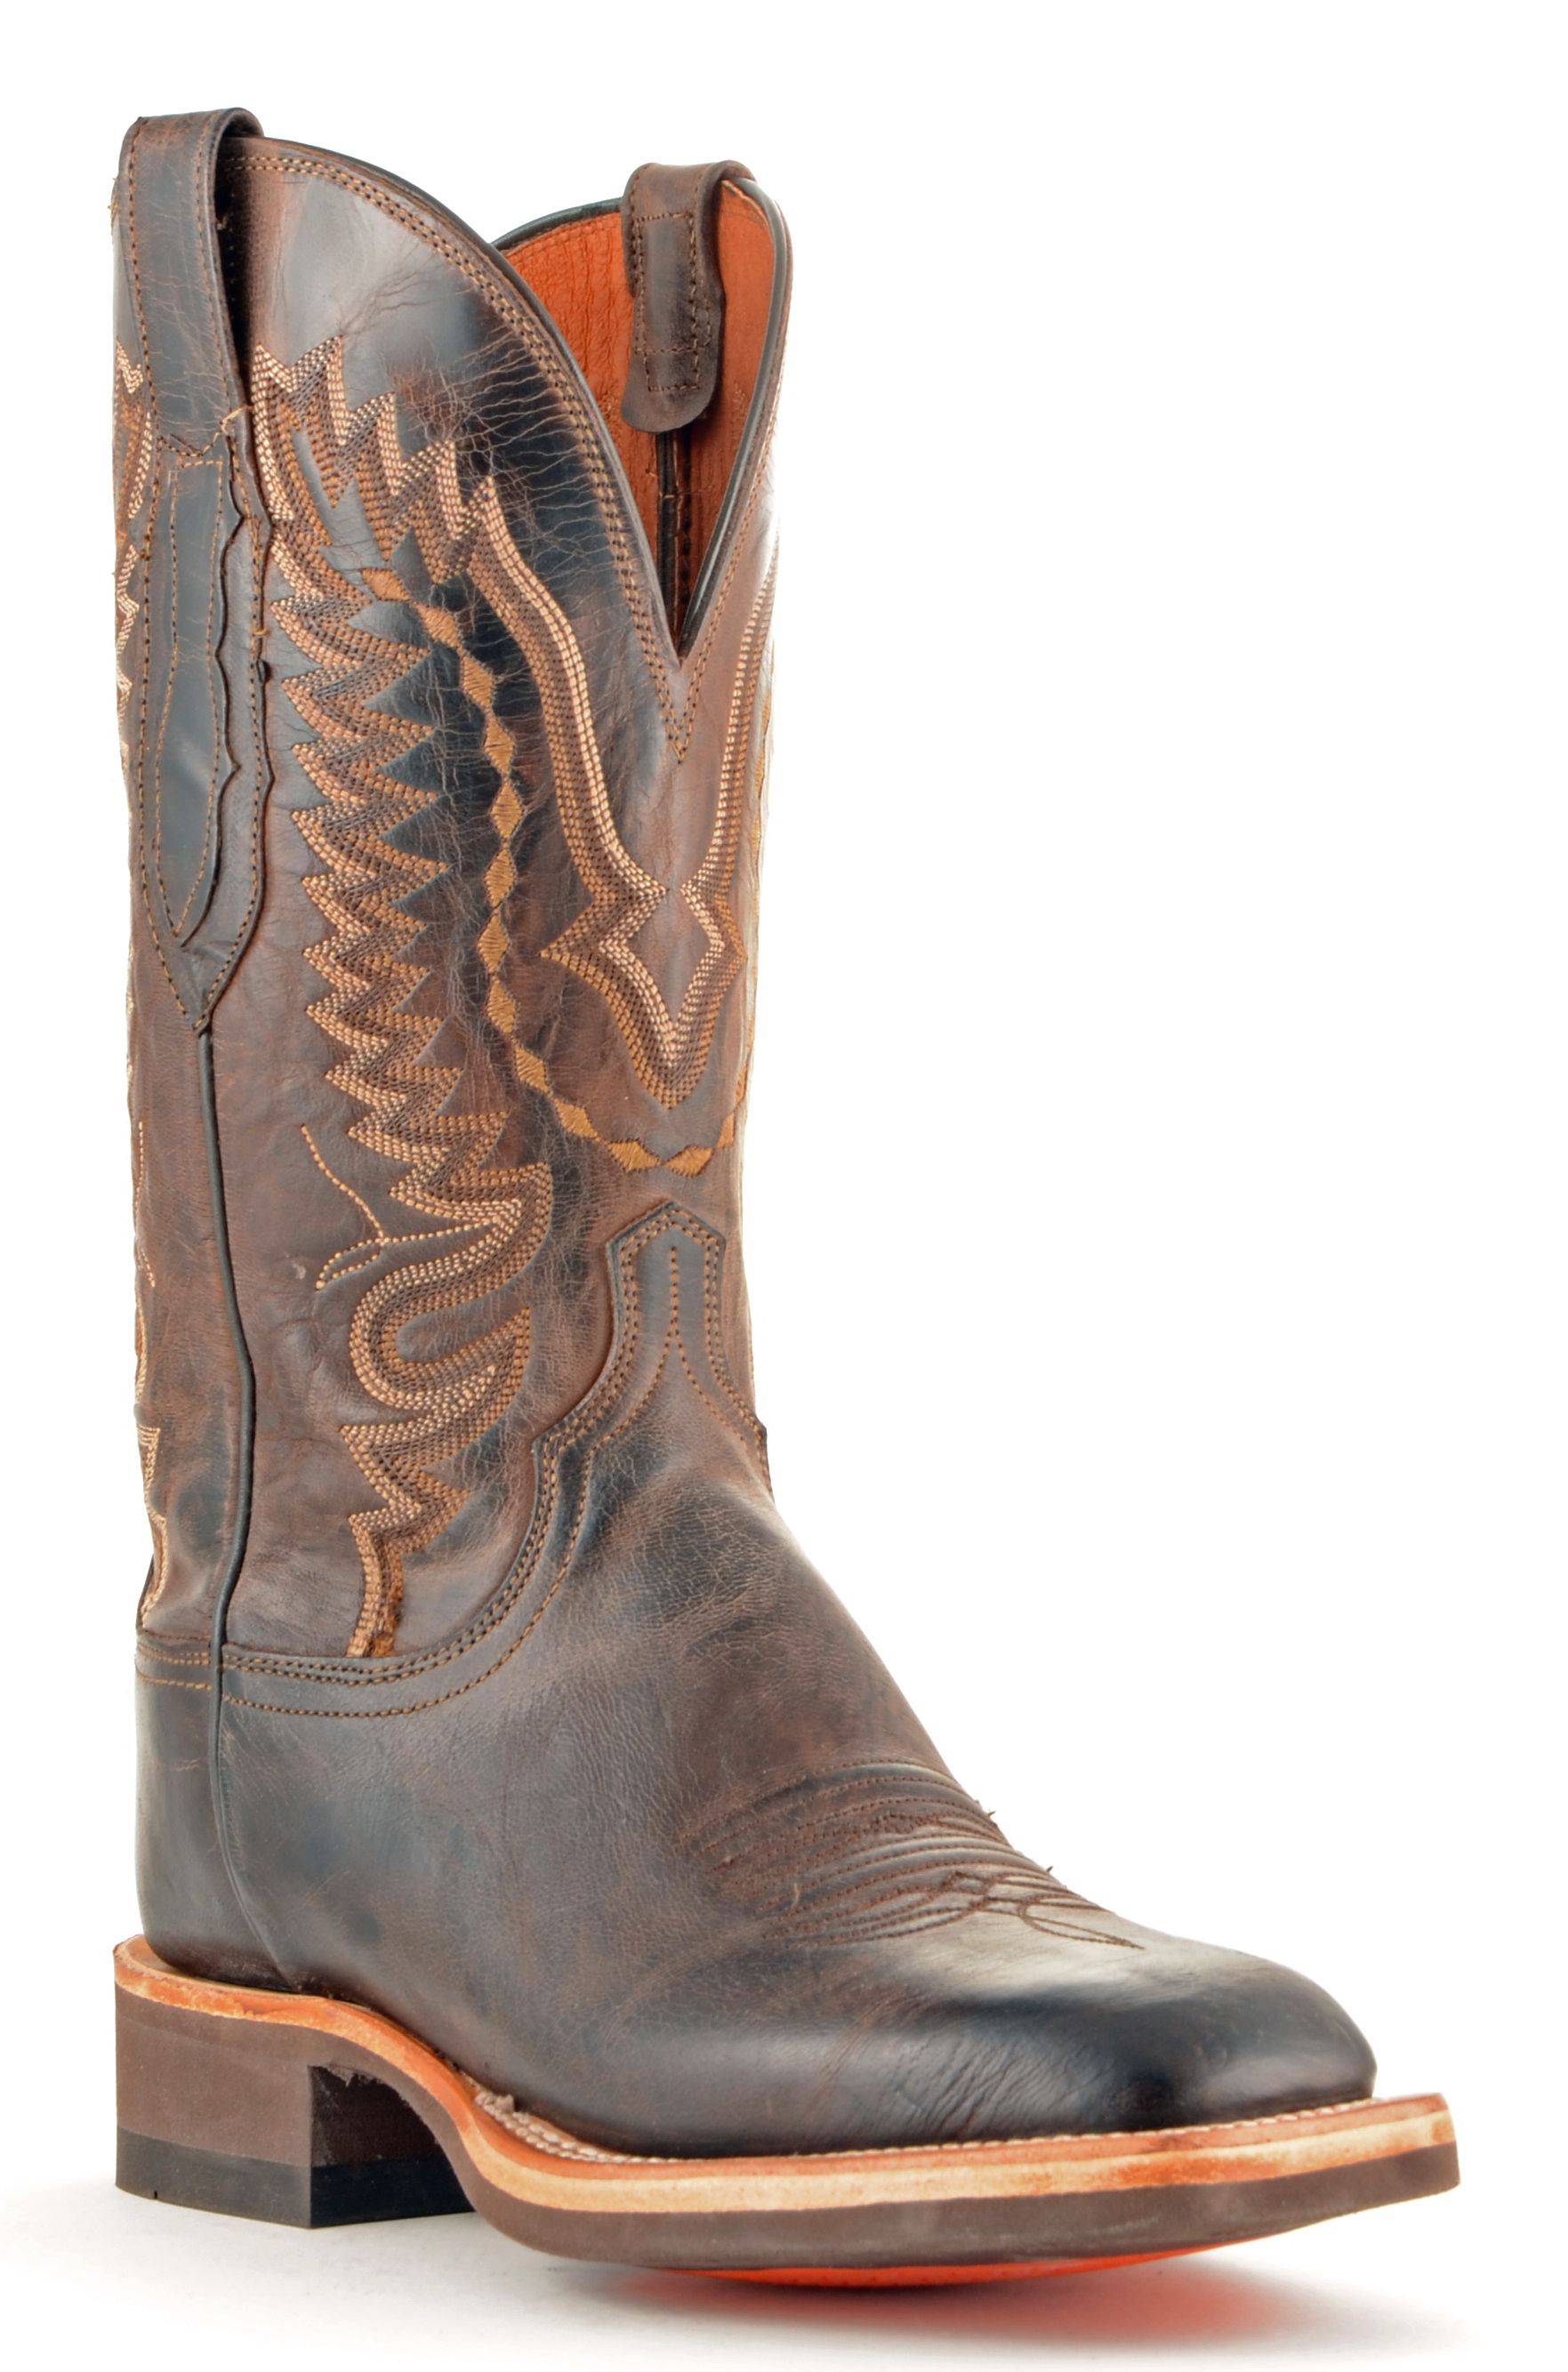 Men's Lucchese Mad Dog Goat Boots Chocolate #CX7792 – Allens Boots